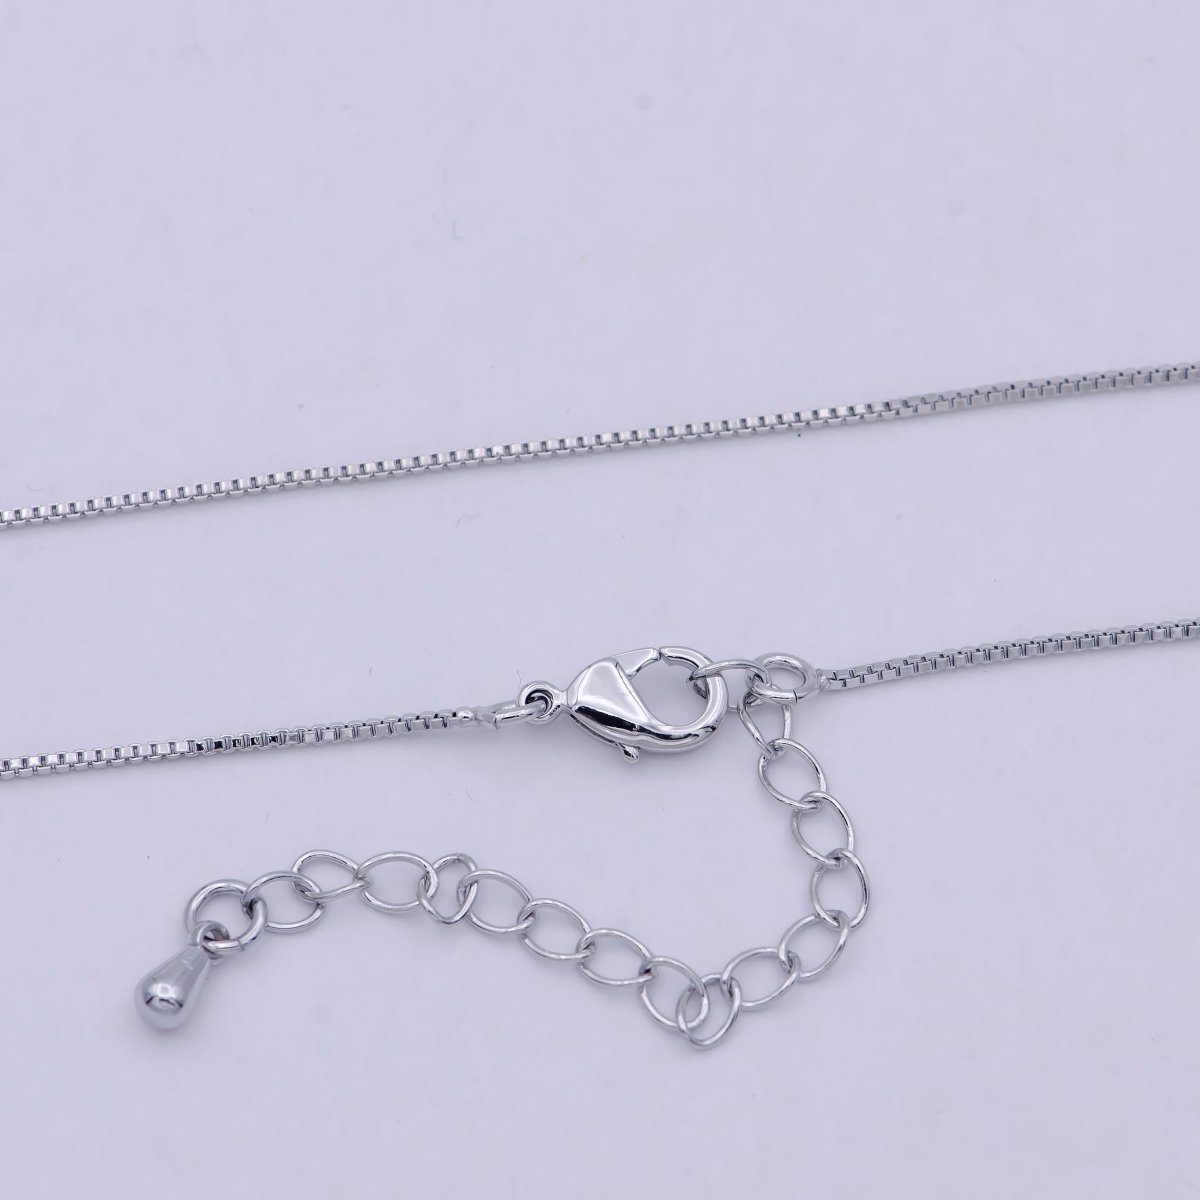 Dainty silver BOX chain finished chain everyday chain, simple silver chain ready to wear | WA-795 Clearance Pricing - DLUXCA